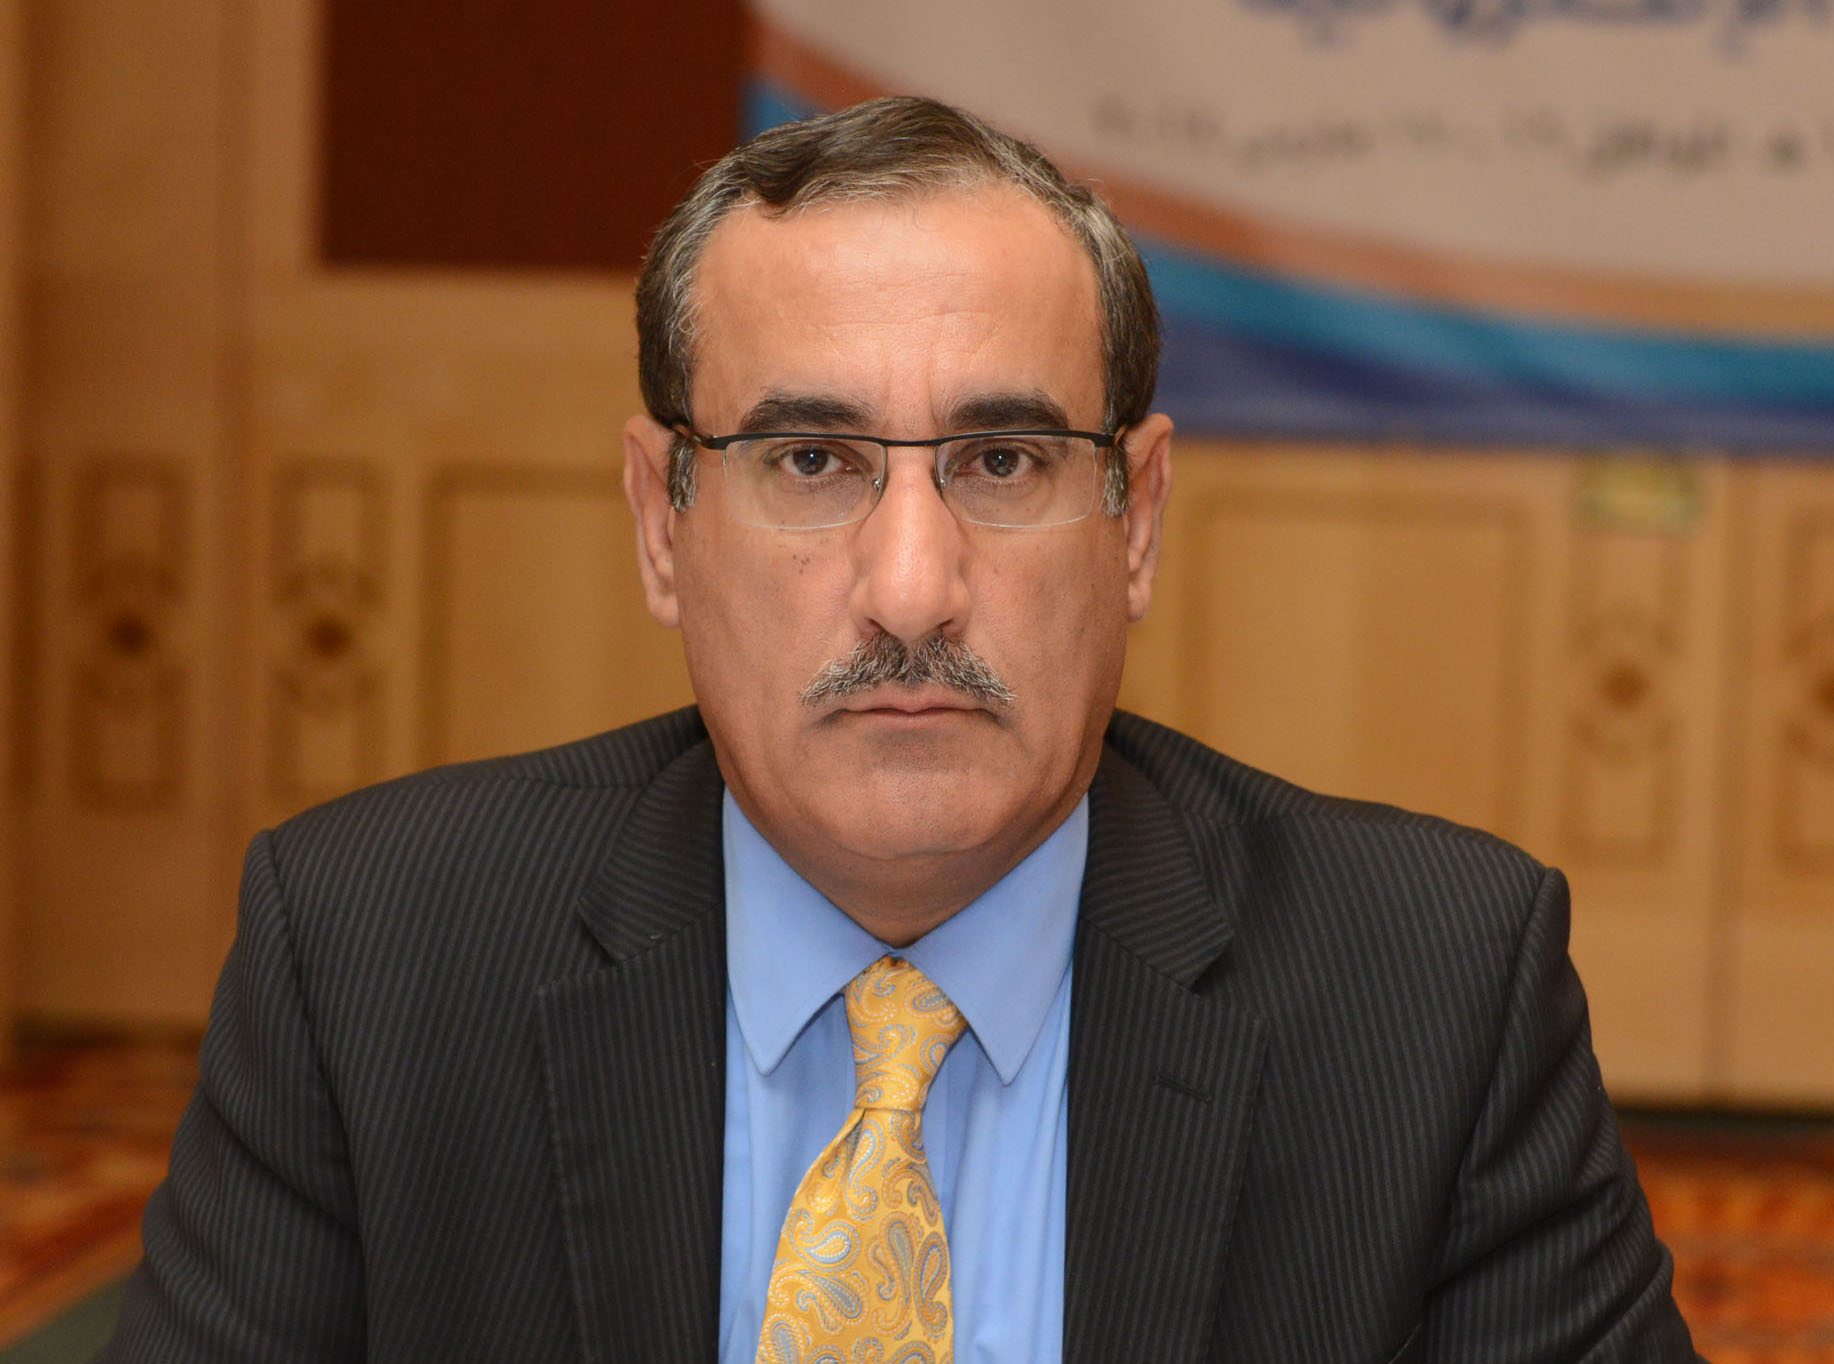 Health Ministry's Assistant Undersecretary for Technical Affairs and Head of the Conference Organizing Committee Qais Al Dwairi